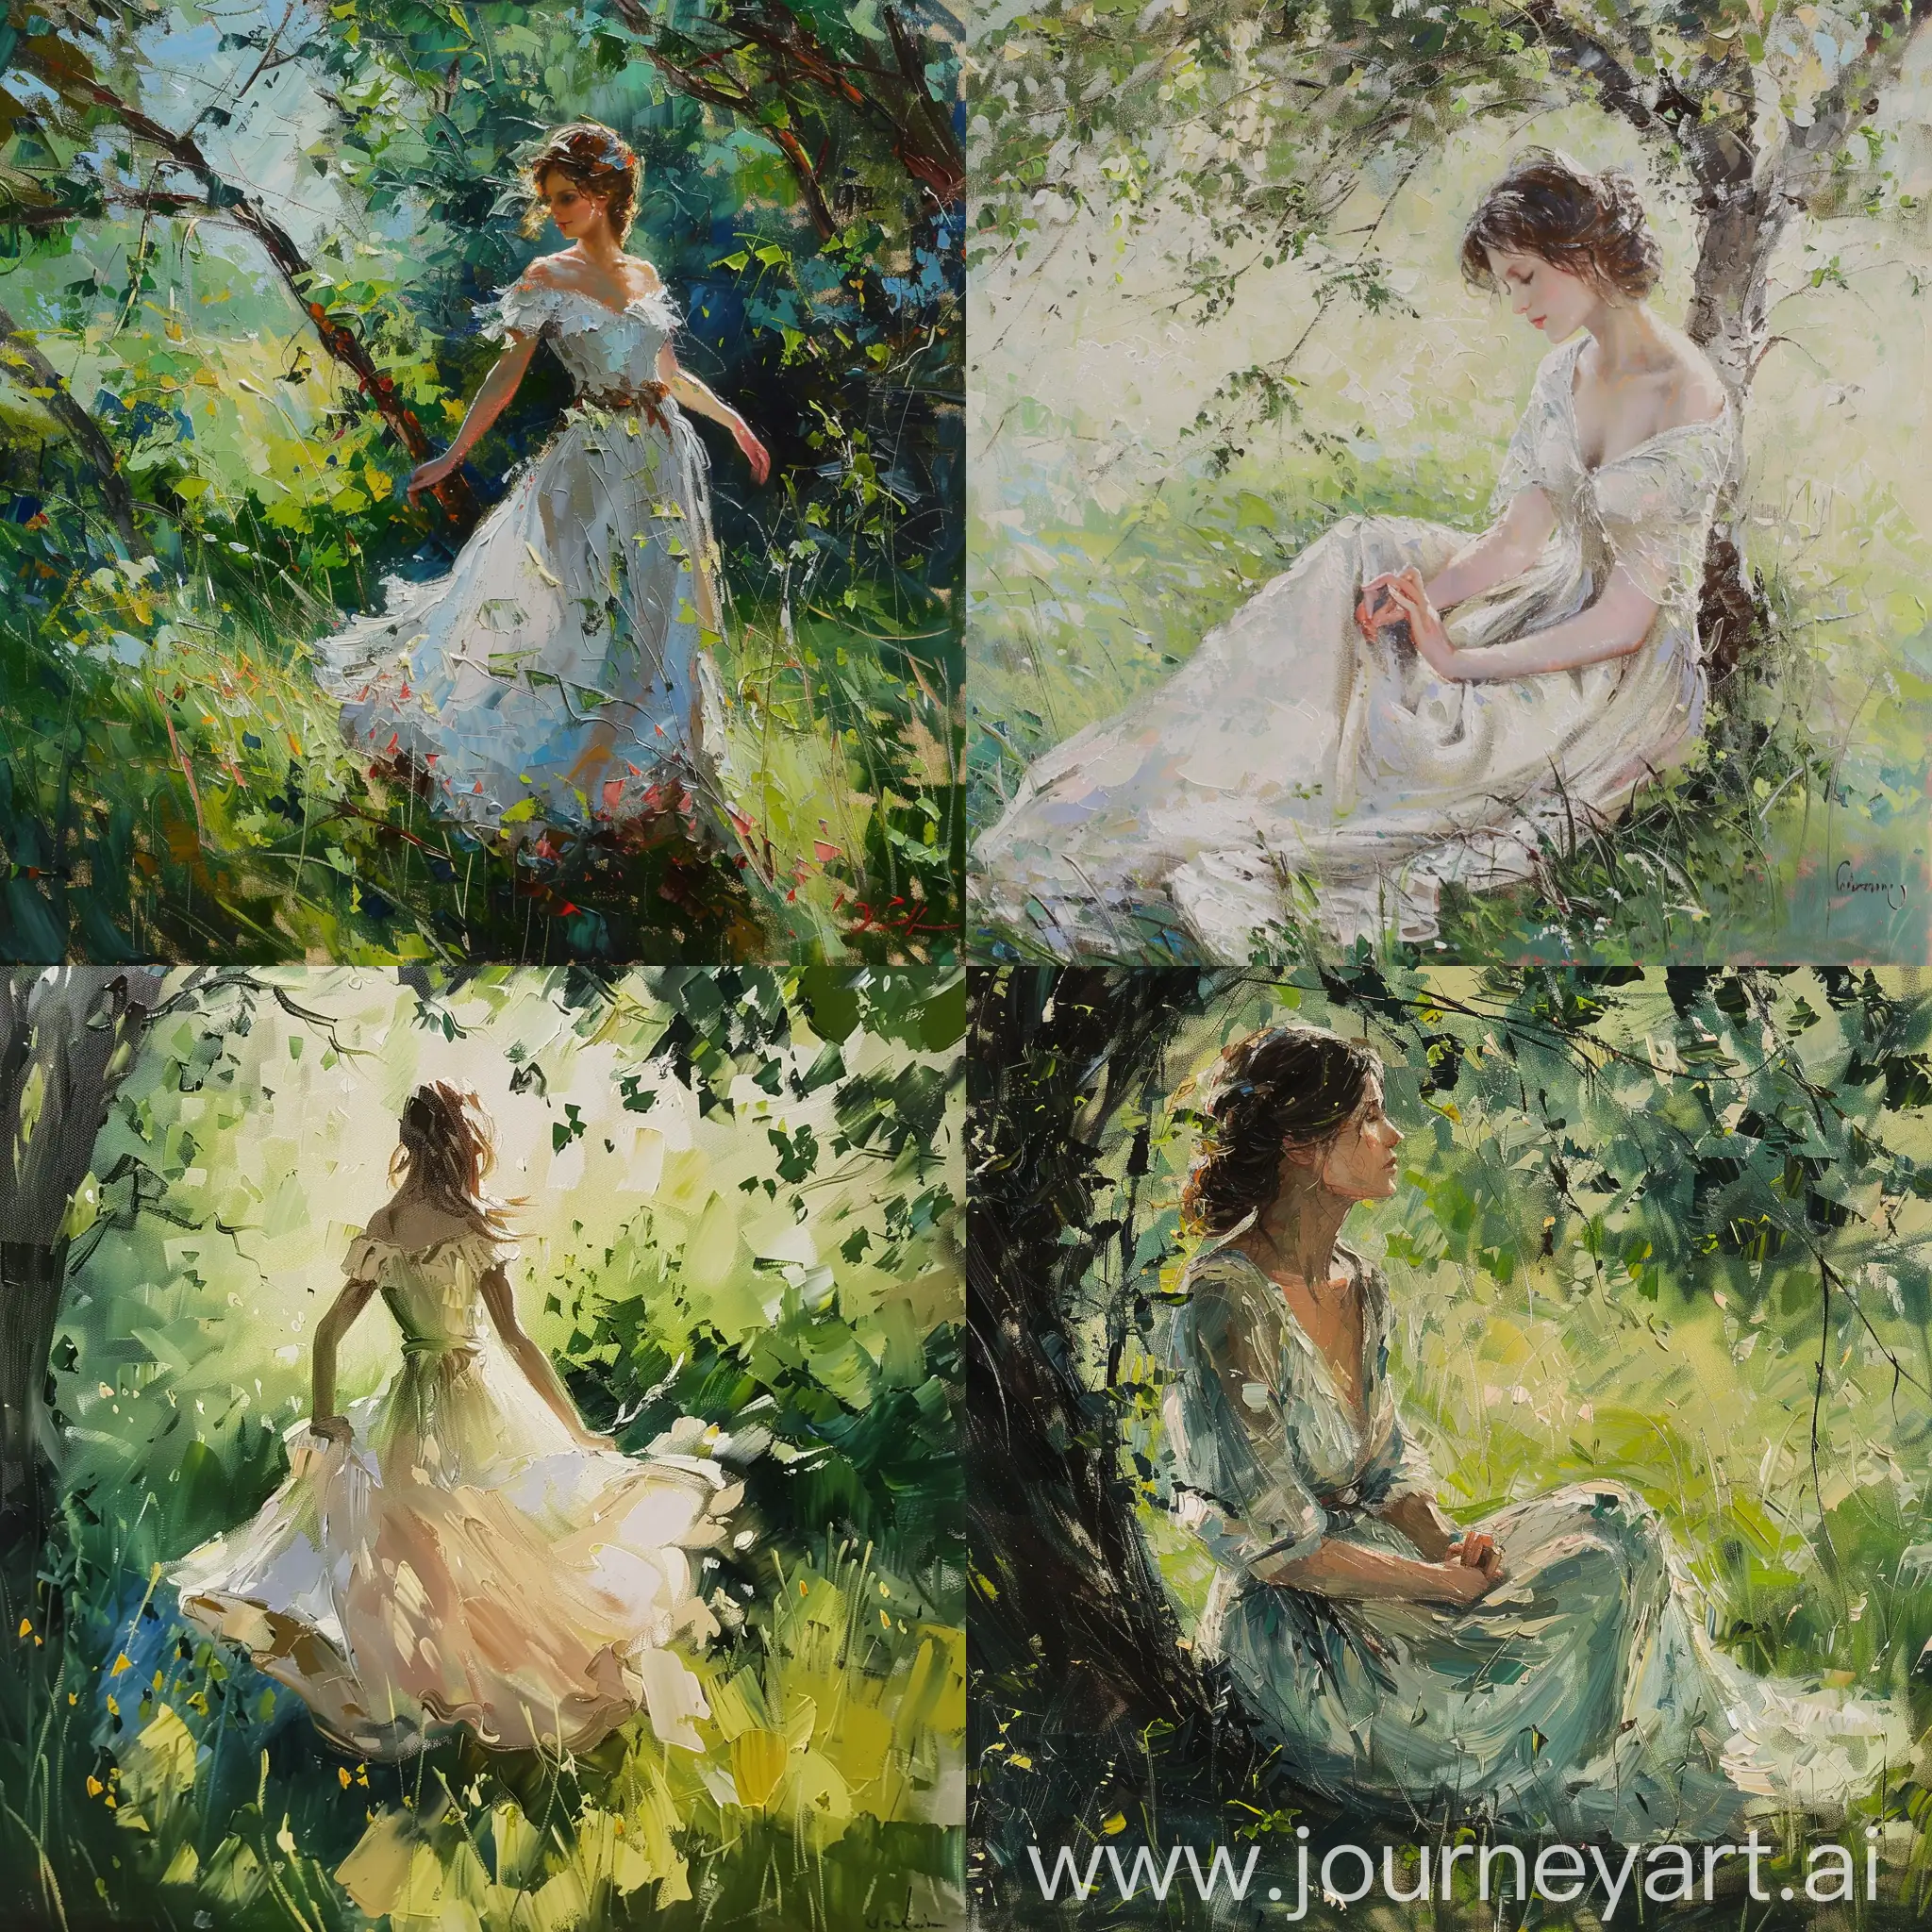 High resolution 4k impressionism painting of a beautify white lady wearing gown under meadow in greenery